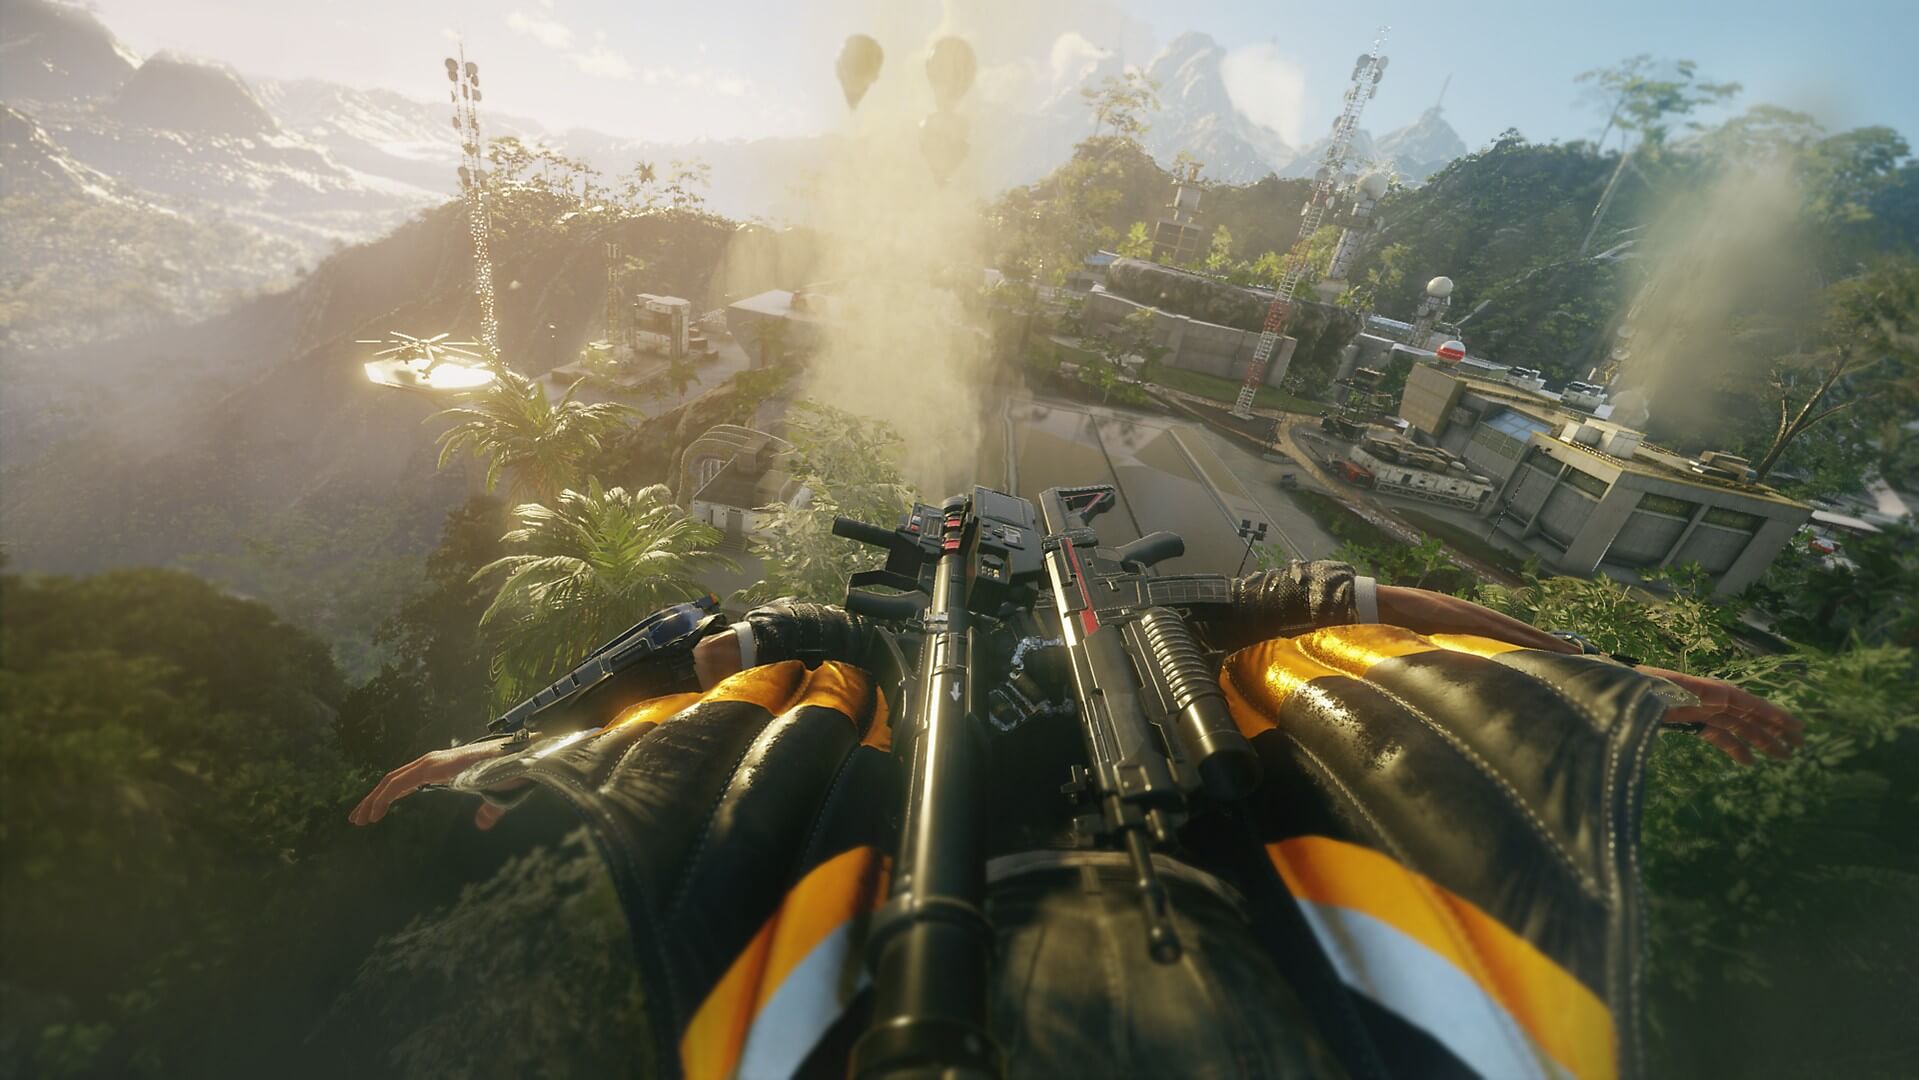 Just Cause 4 Gold Edition